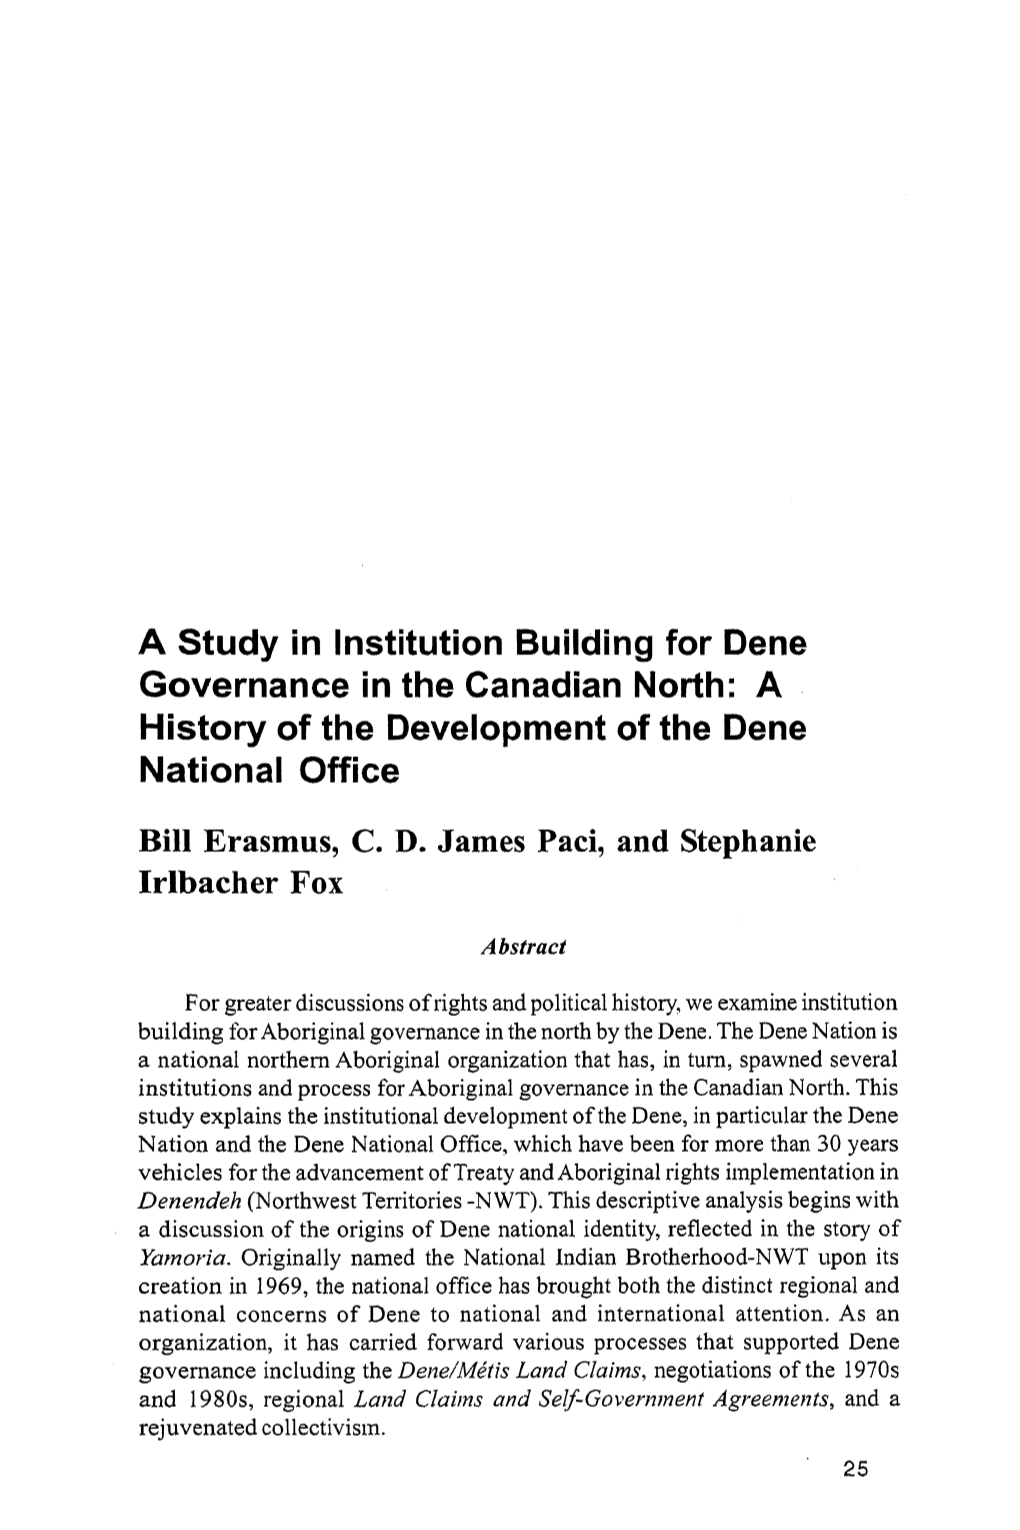 A History of the Development of the Dene National Office